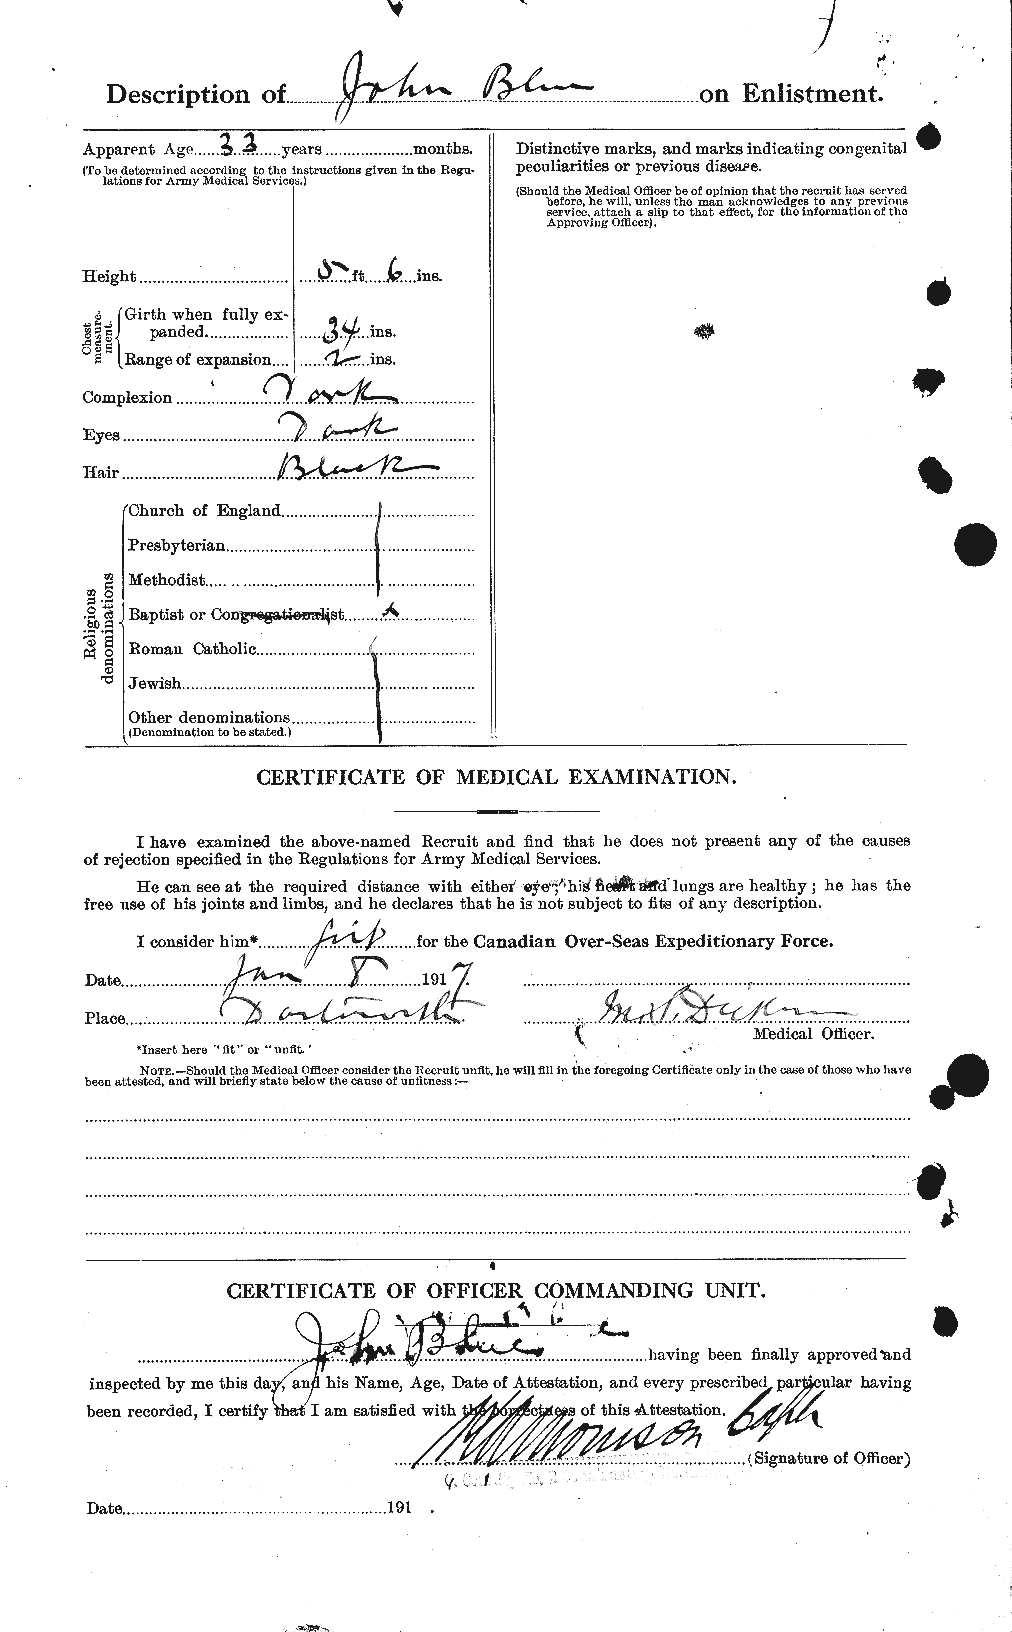 Personnel Records of the First World War - CEF 247141b